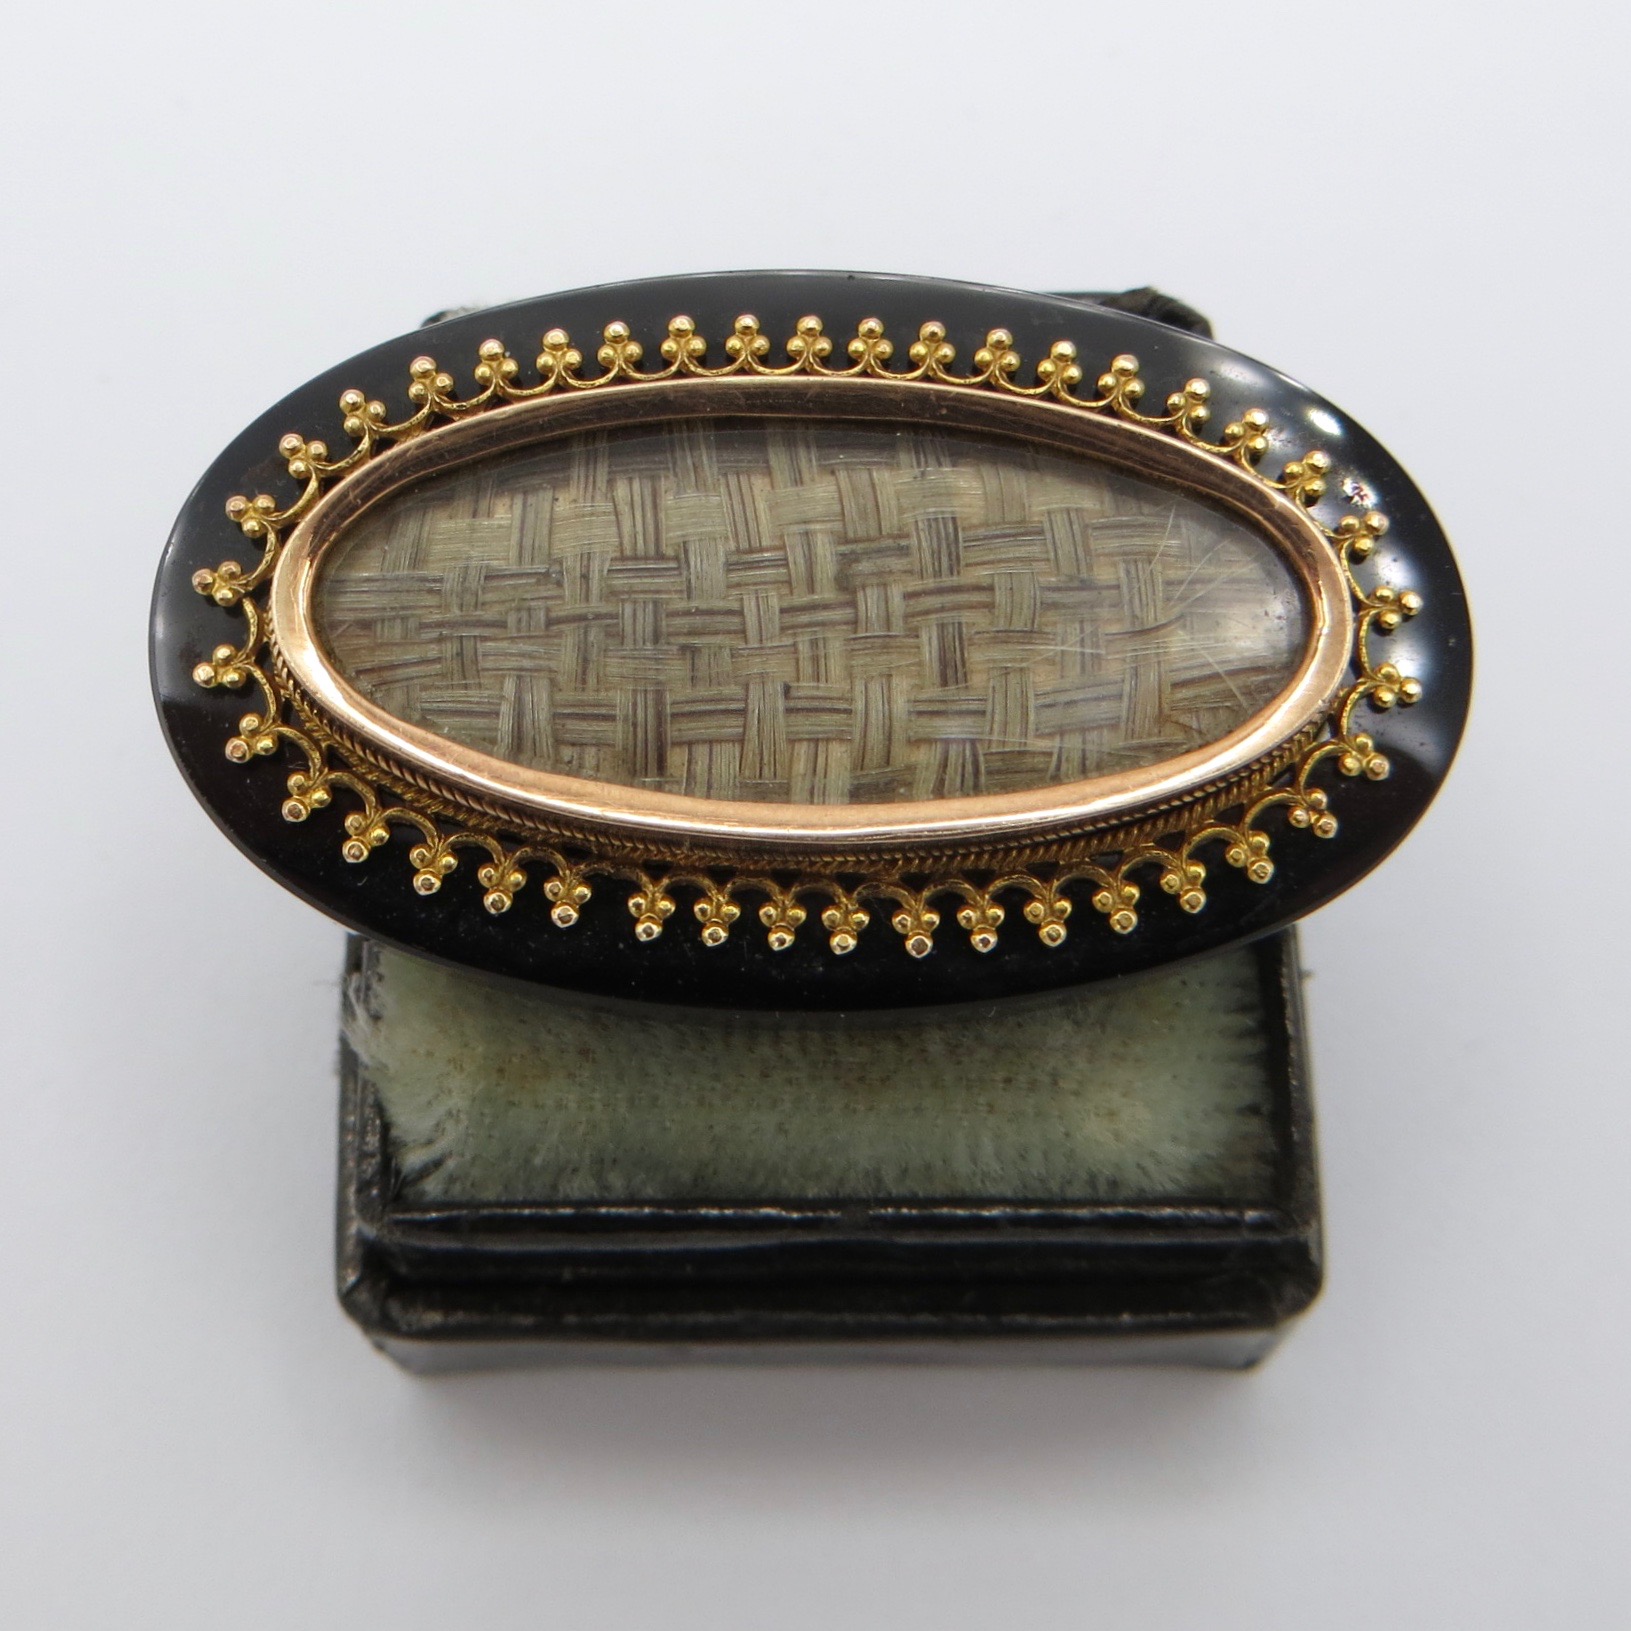 Victorian Jet & Gold Mourning Pin, c.1850-60